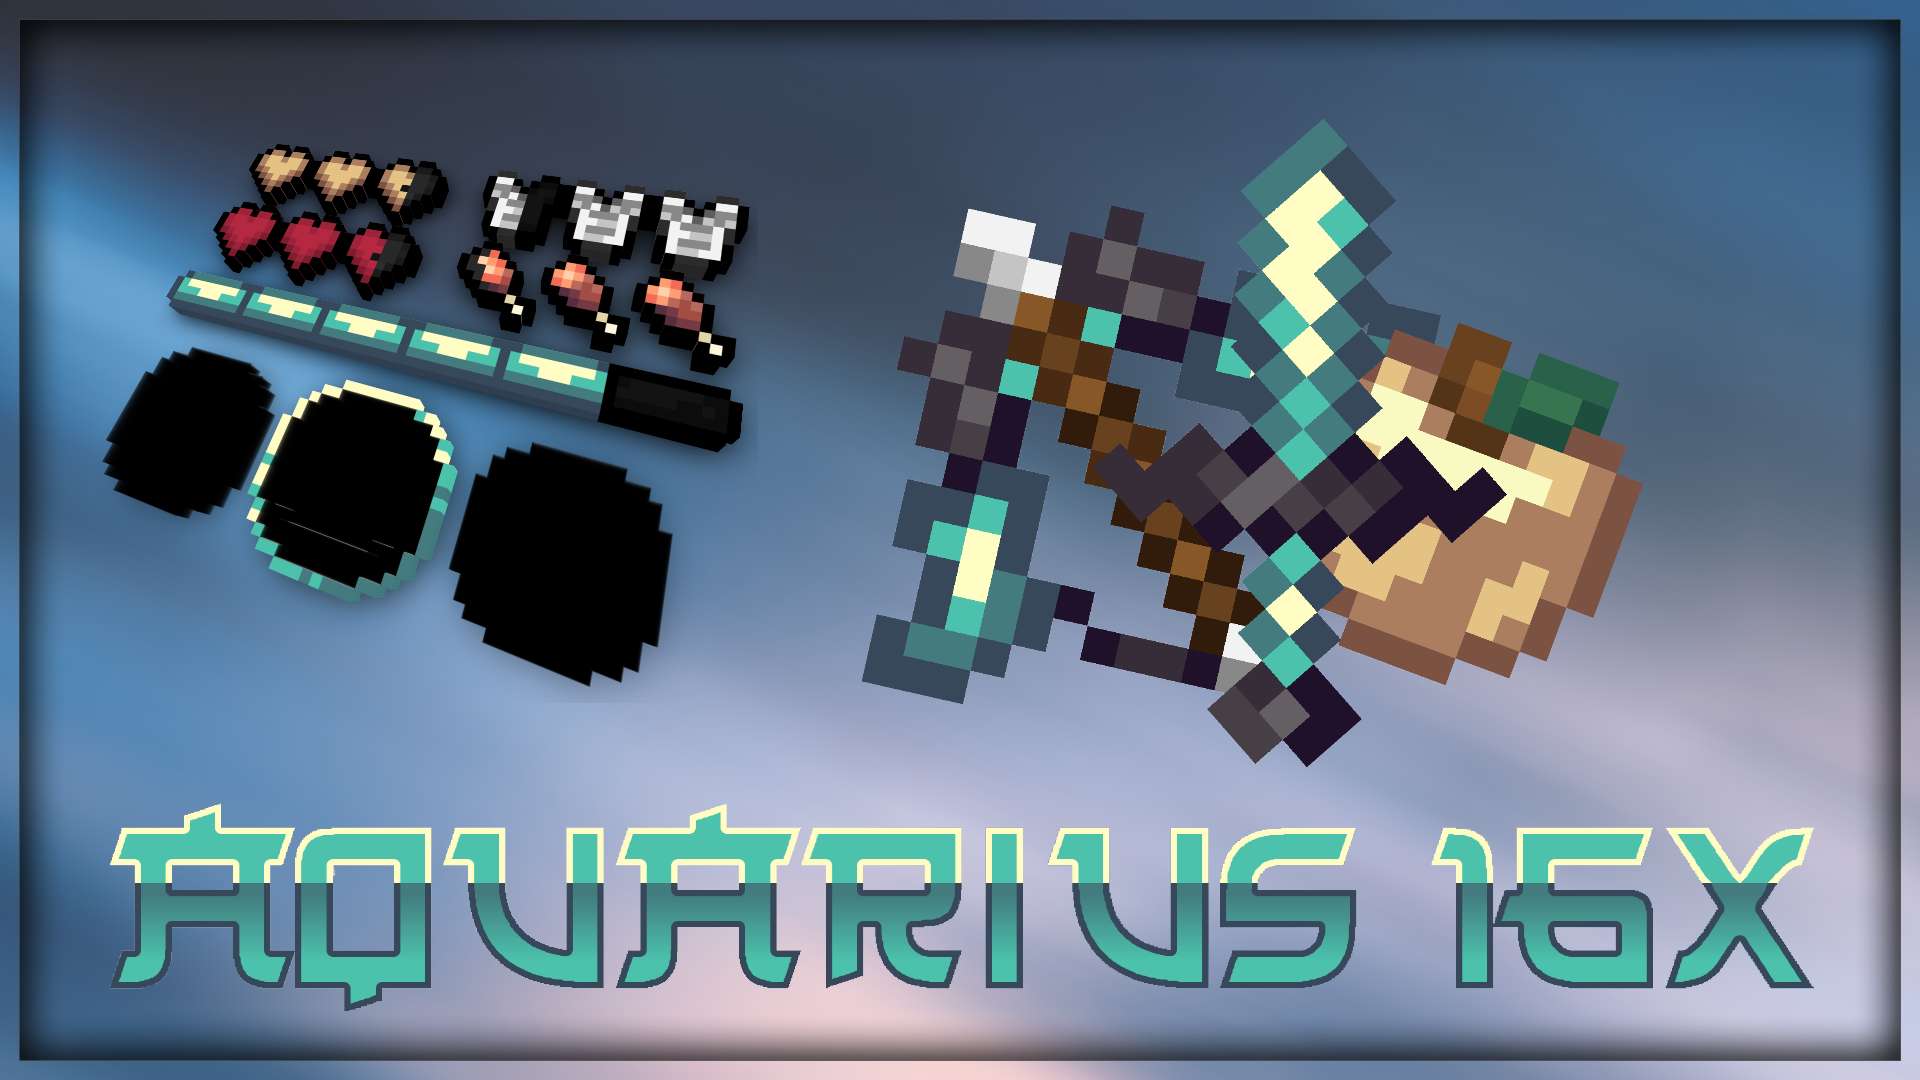 Gallery Banner for Aquarius 1.8.9 on PvPRP